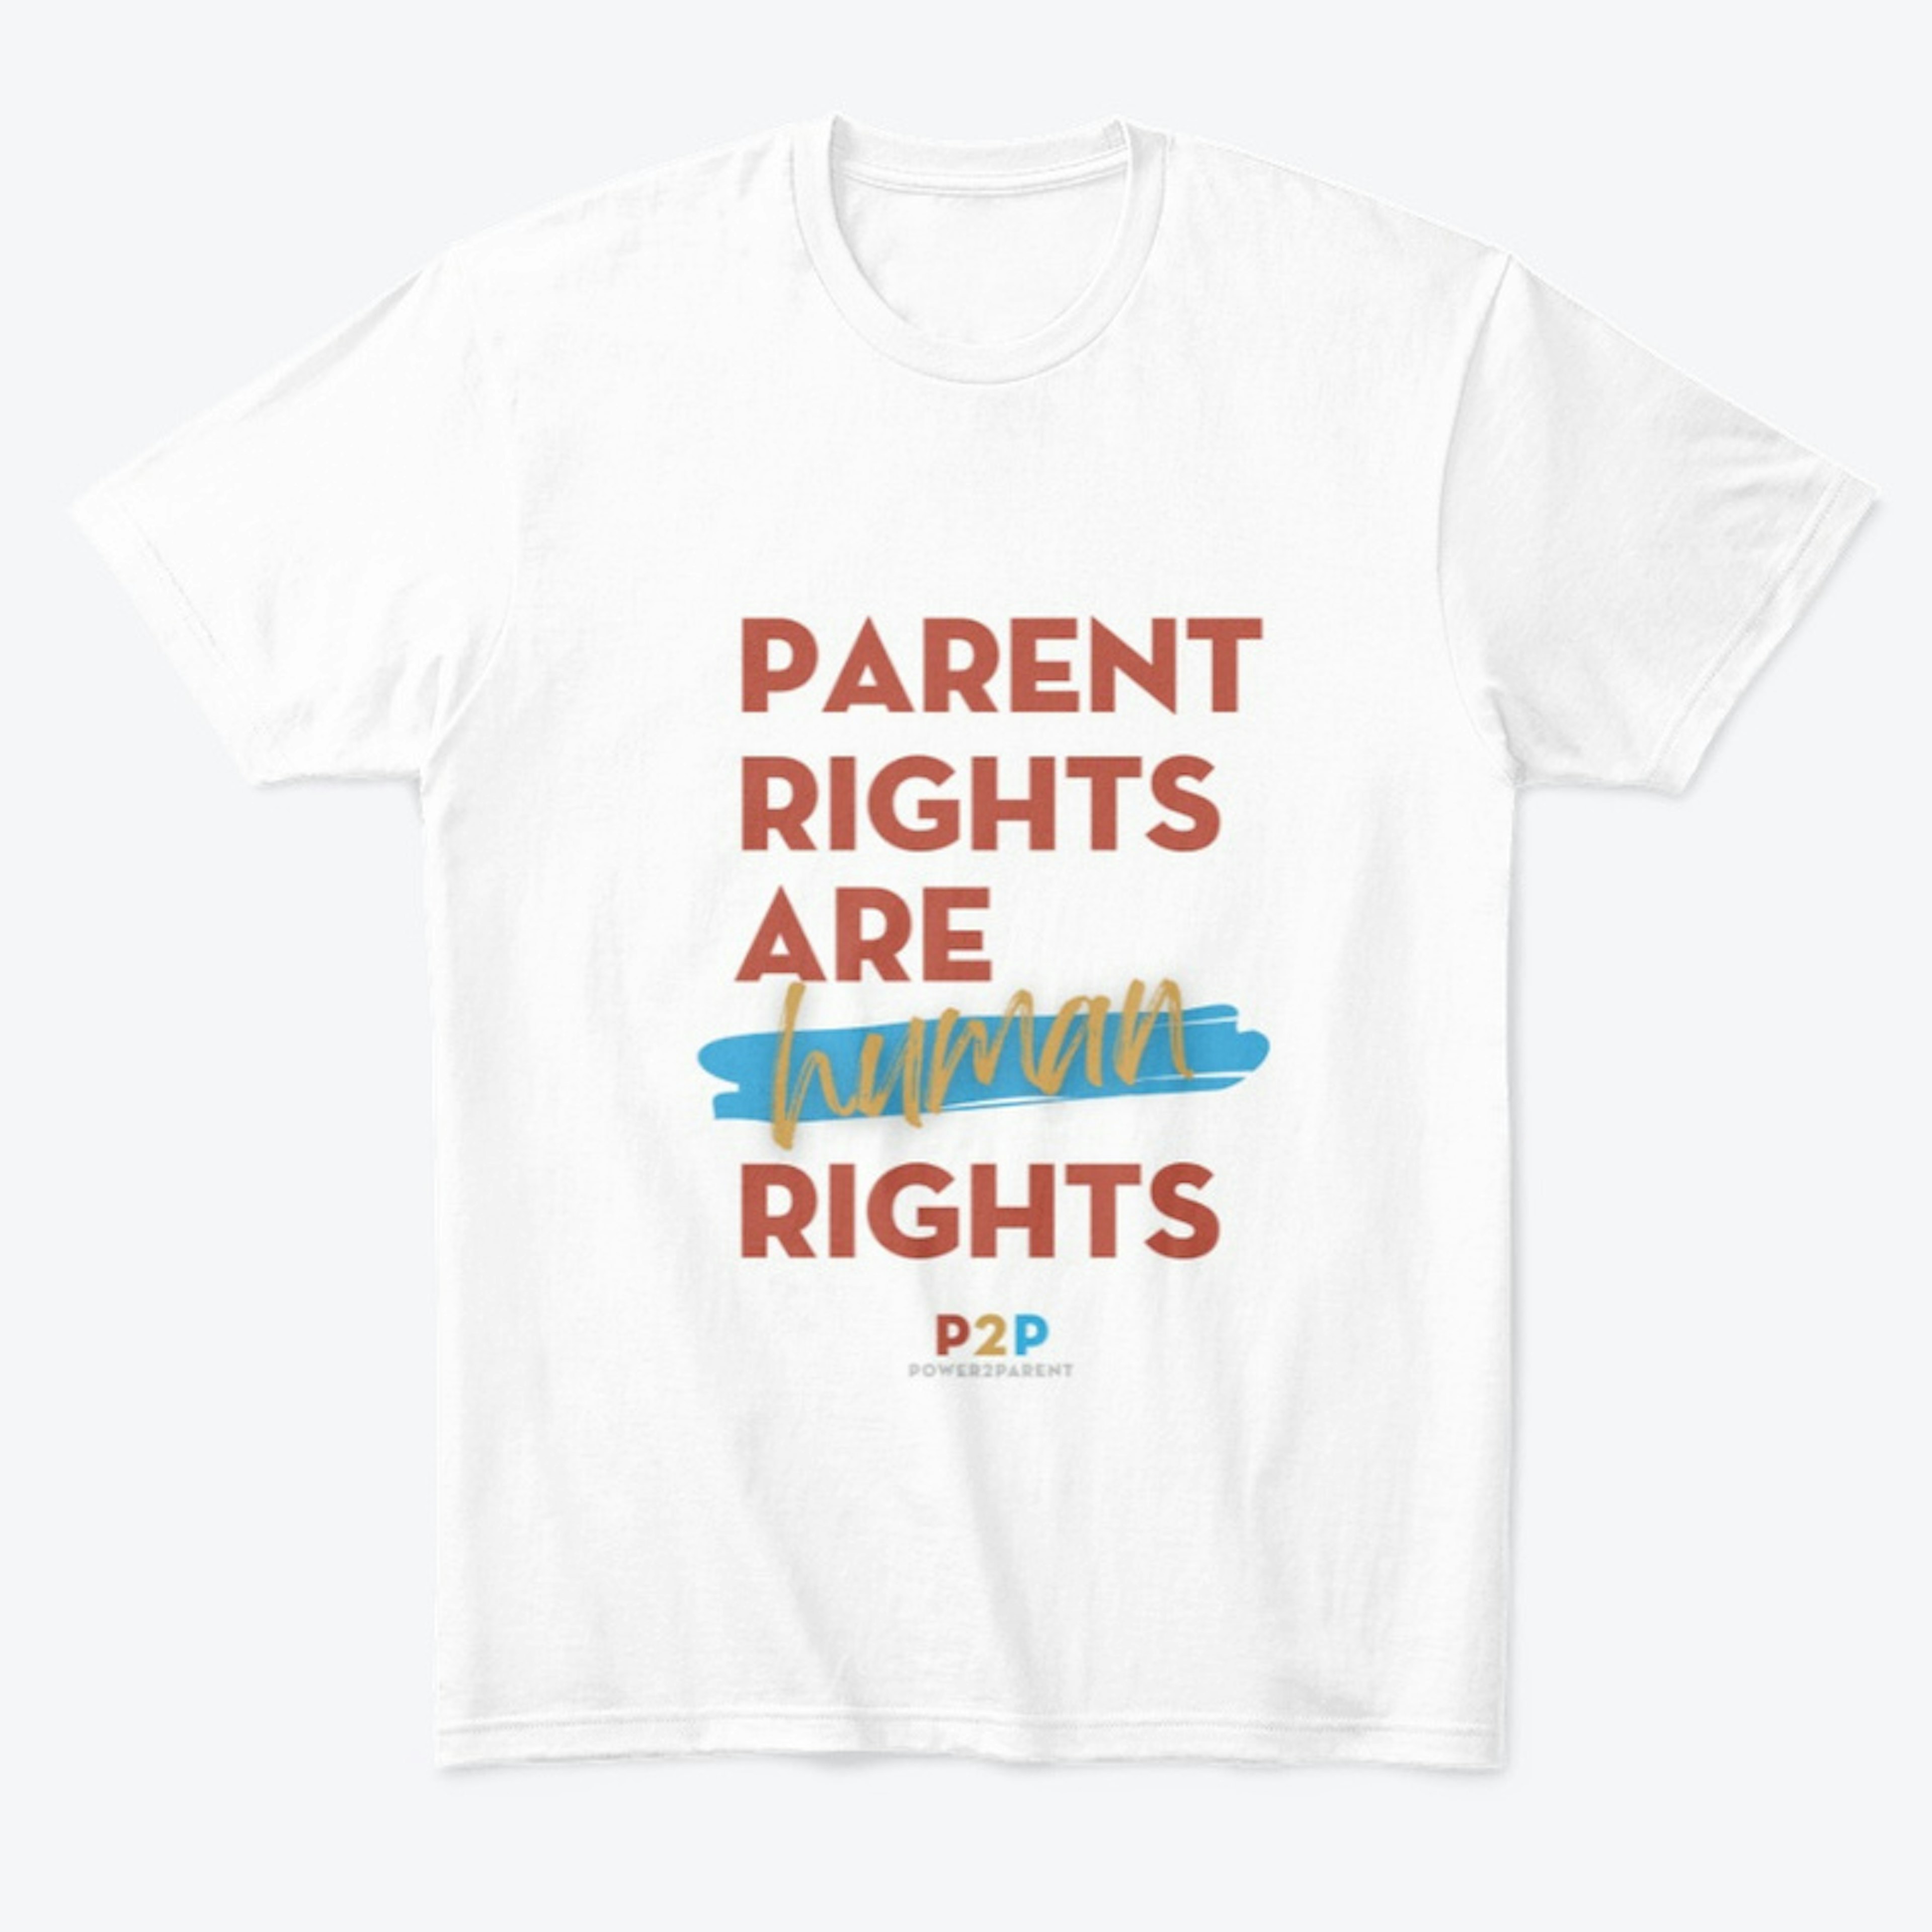 Parent's Rights are Human Rights